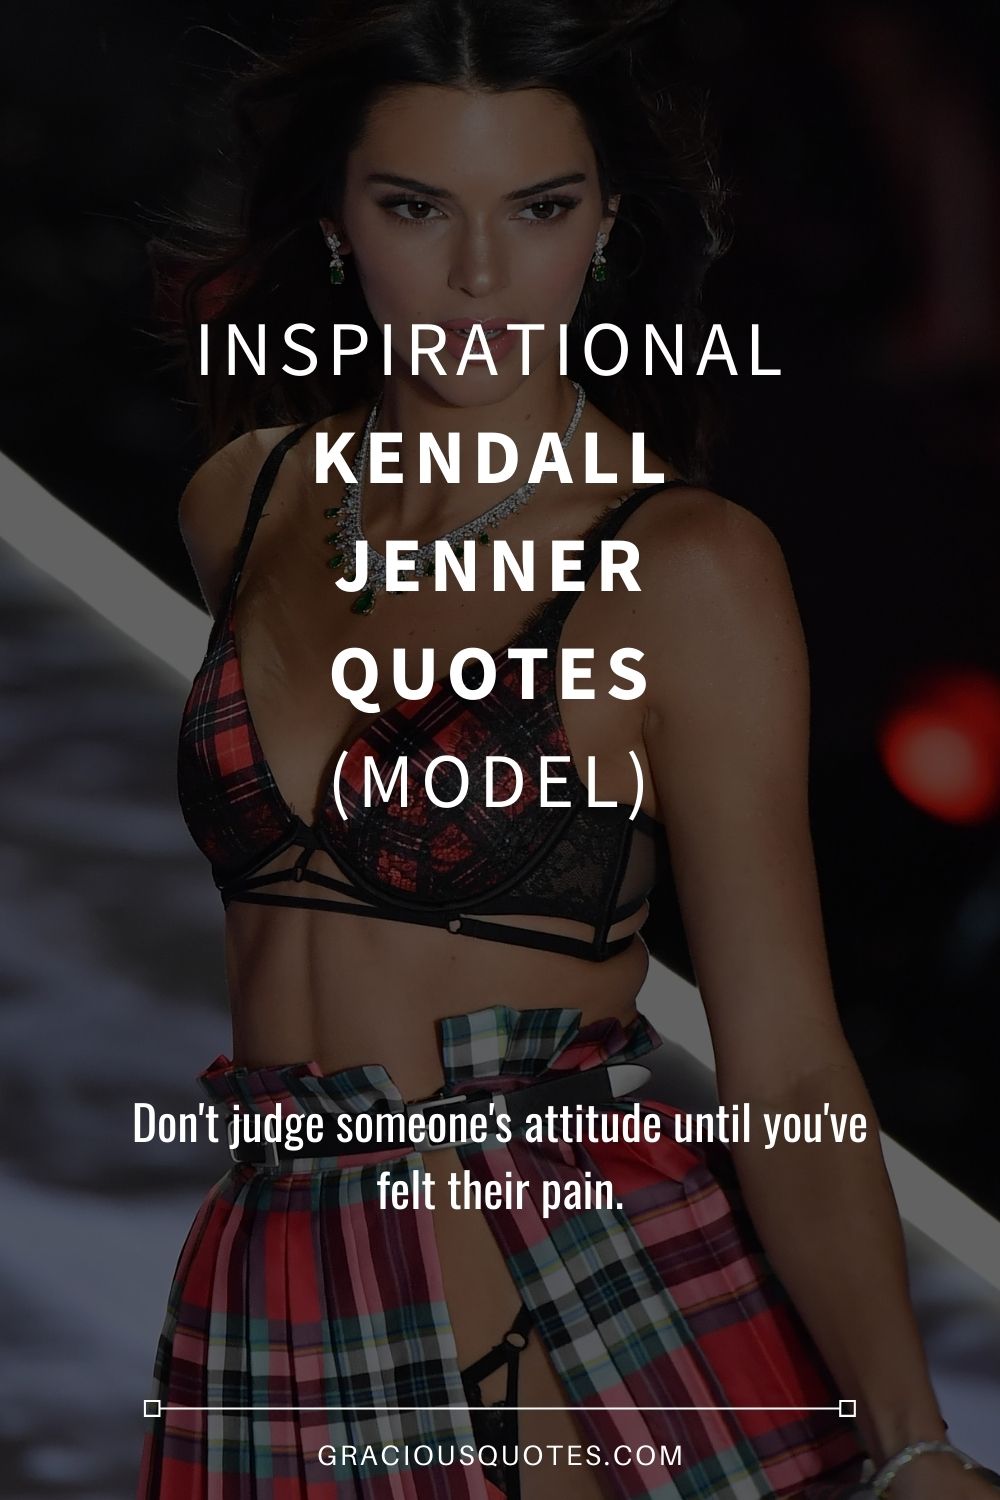 Inspirational KendalL Jenner Quotes (MODEL) - Gracious Quotes